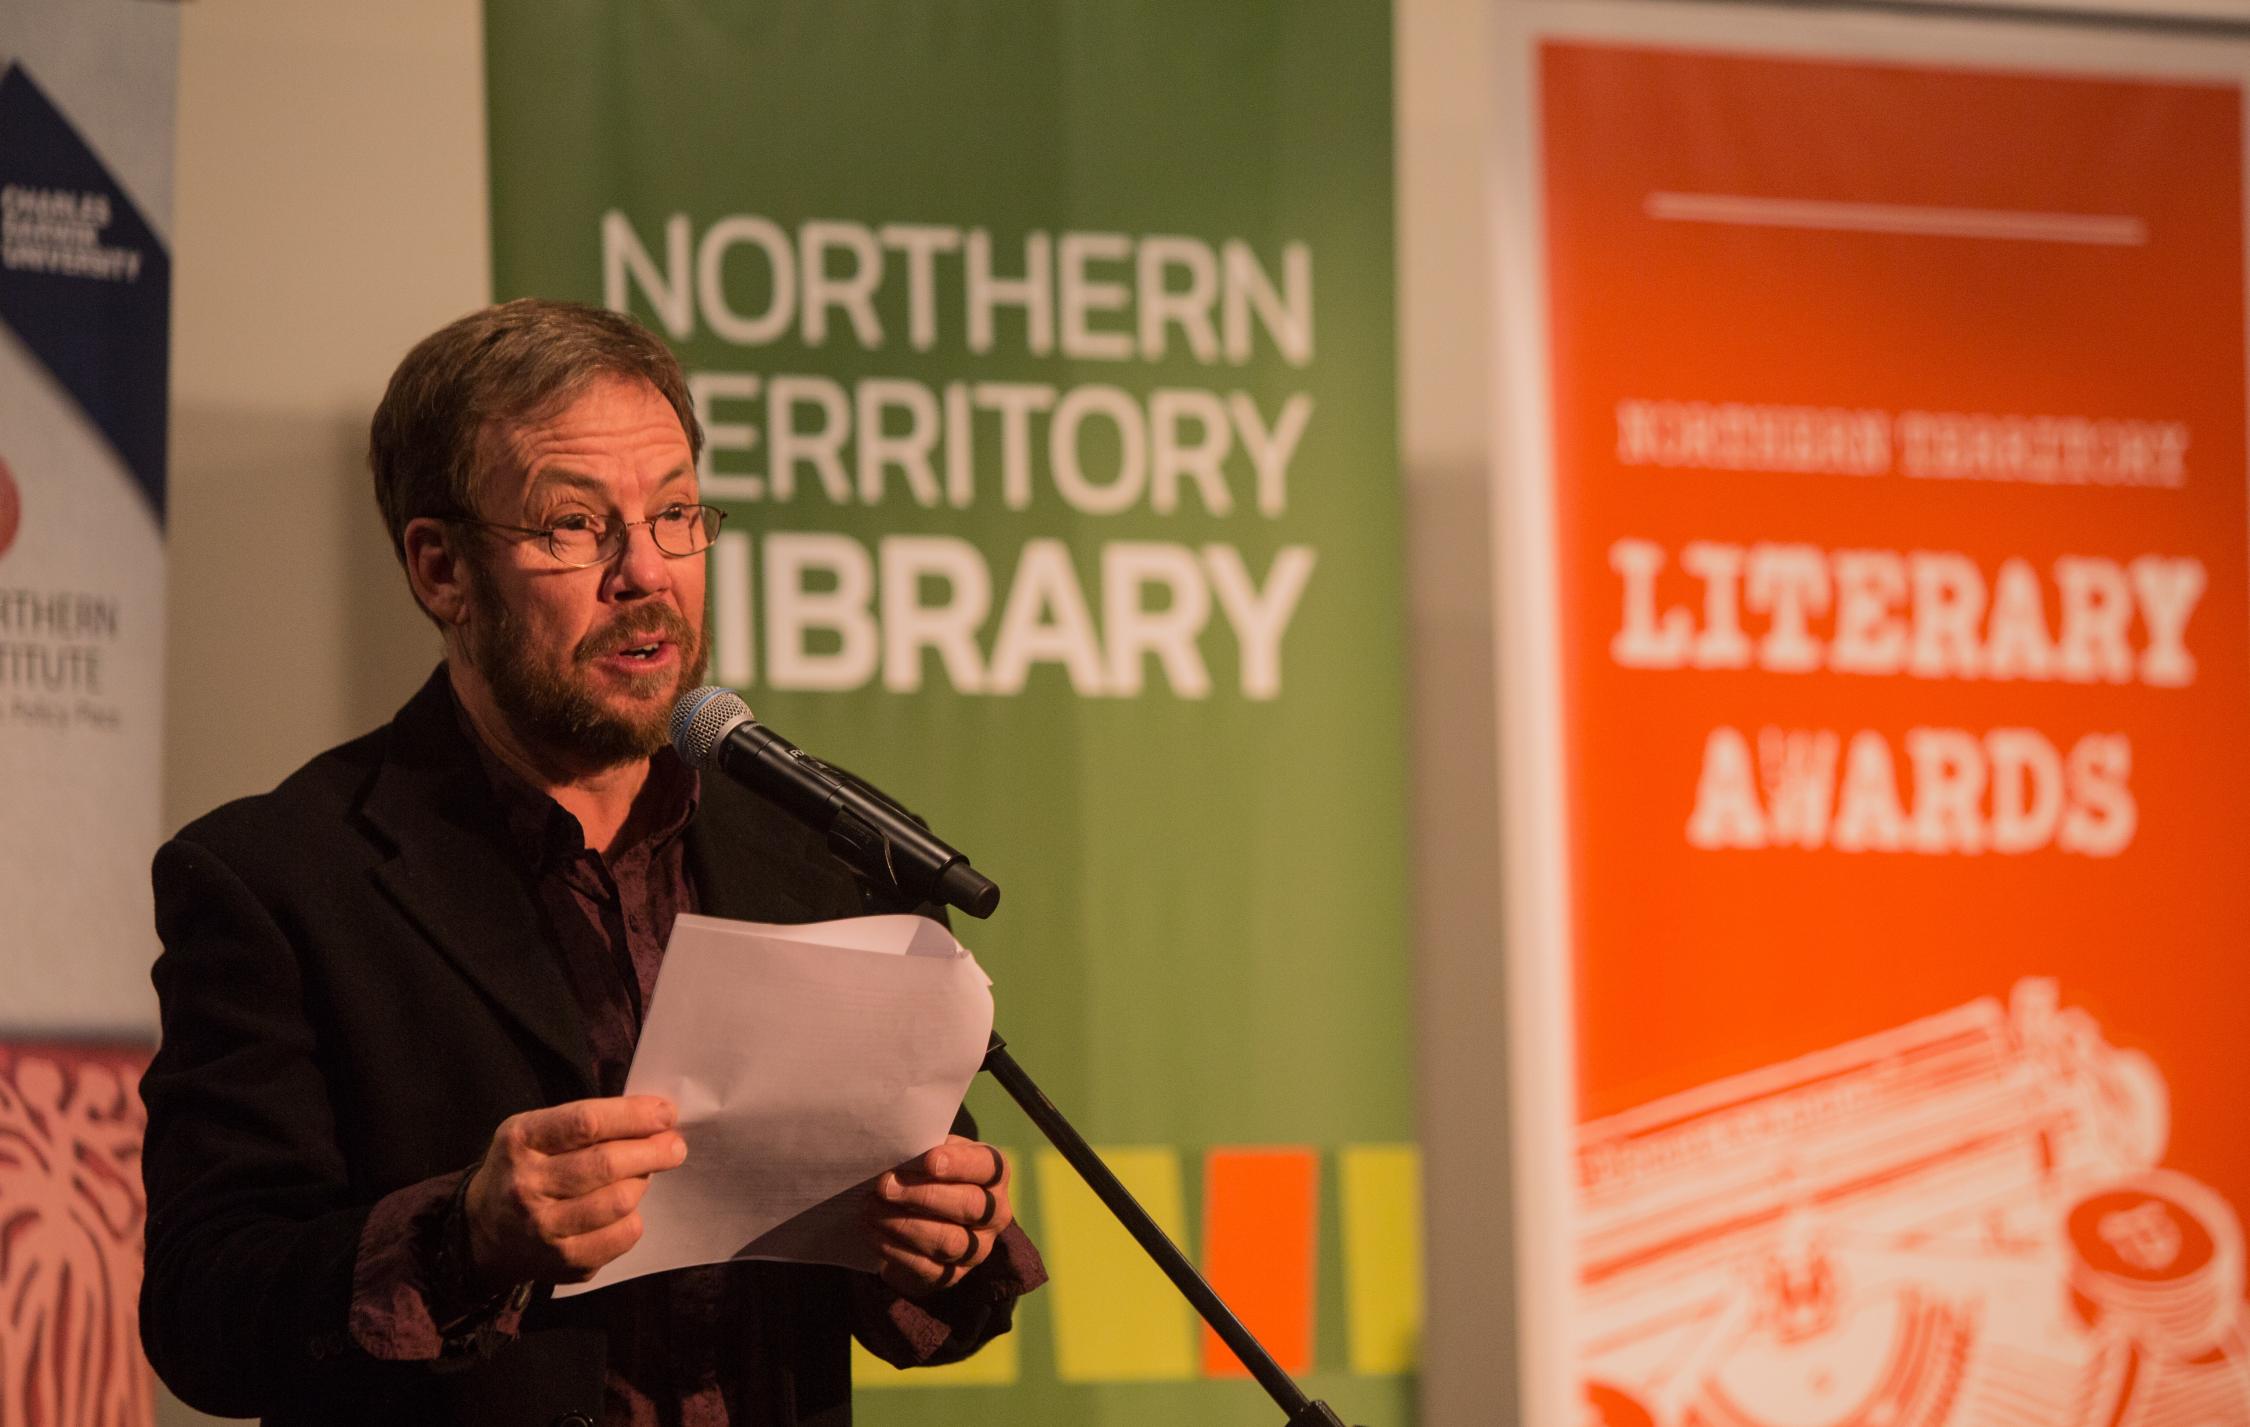 Man on left hand side wearing glass, dark jacket and shirt reading into a microphone. Behind are green and orange banners. 